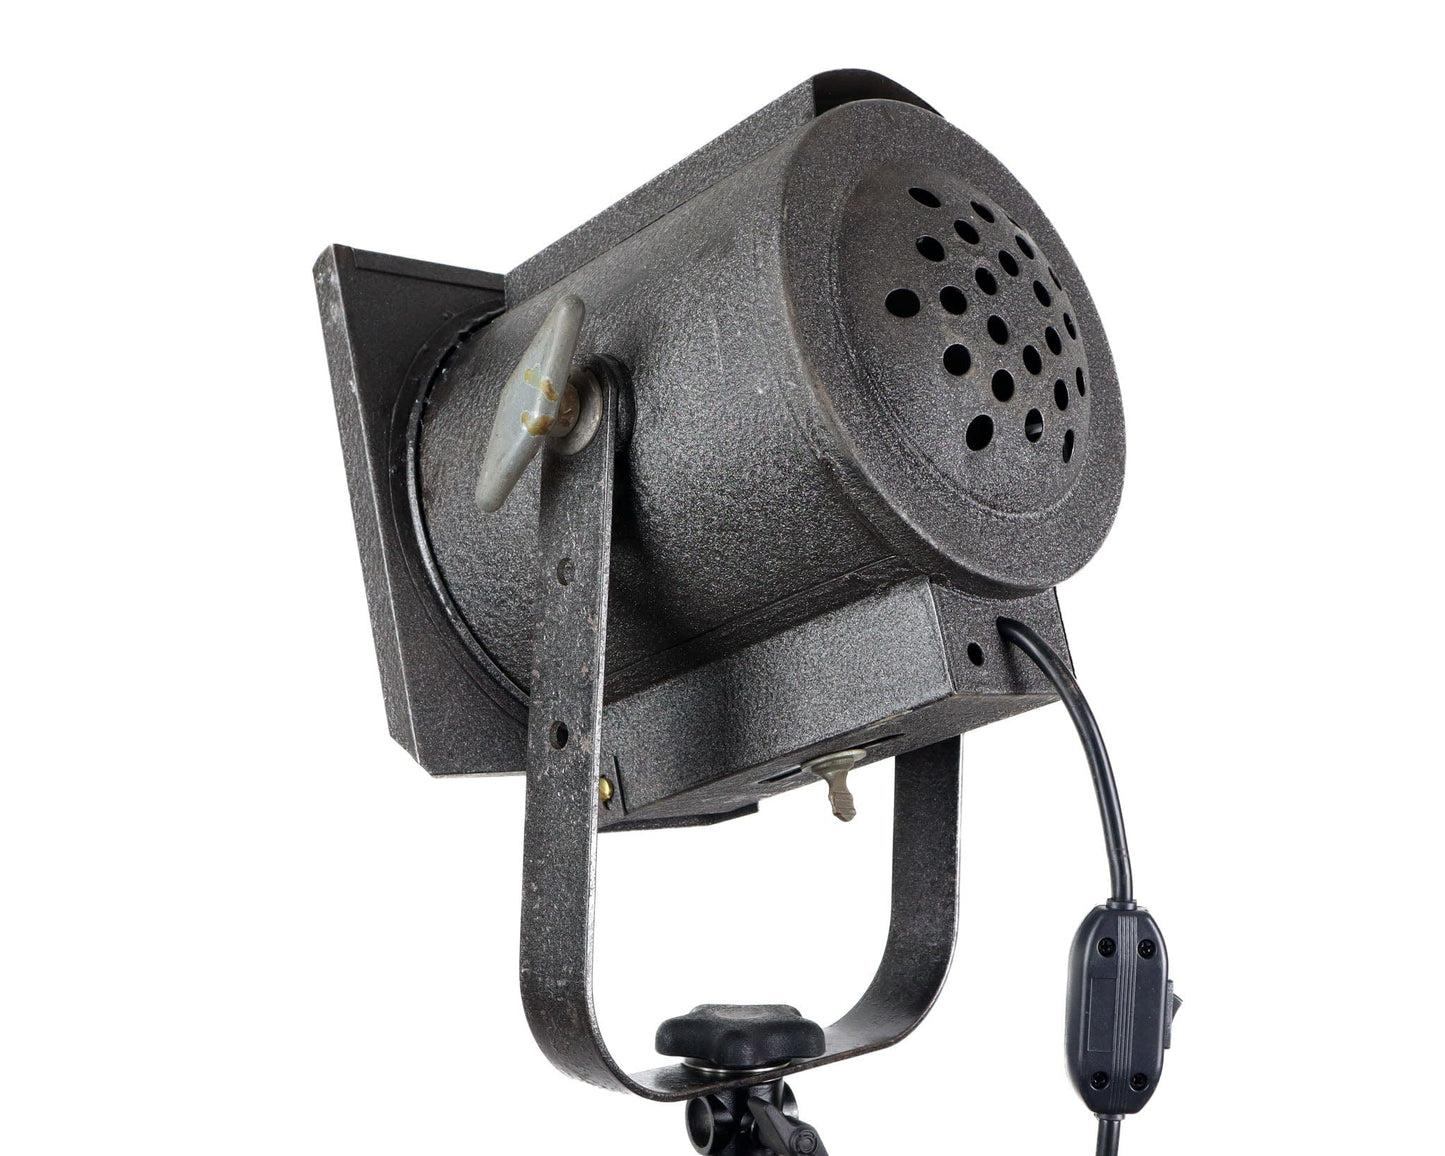 LightAndTimeArt Flood & Spot Lights Small, Dark Gray Stage light with Colored Lenses, Home Theater & Movie Room Decor